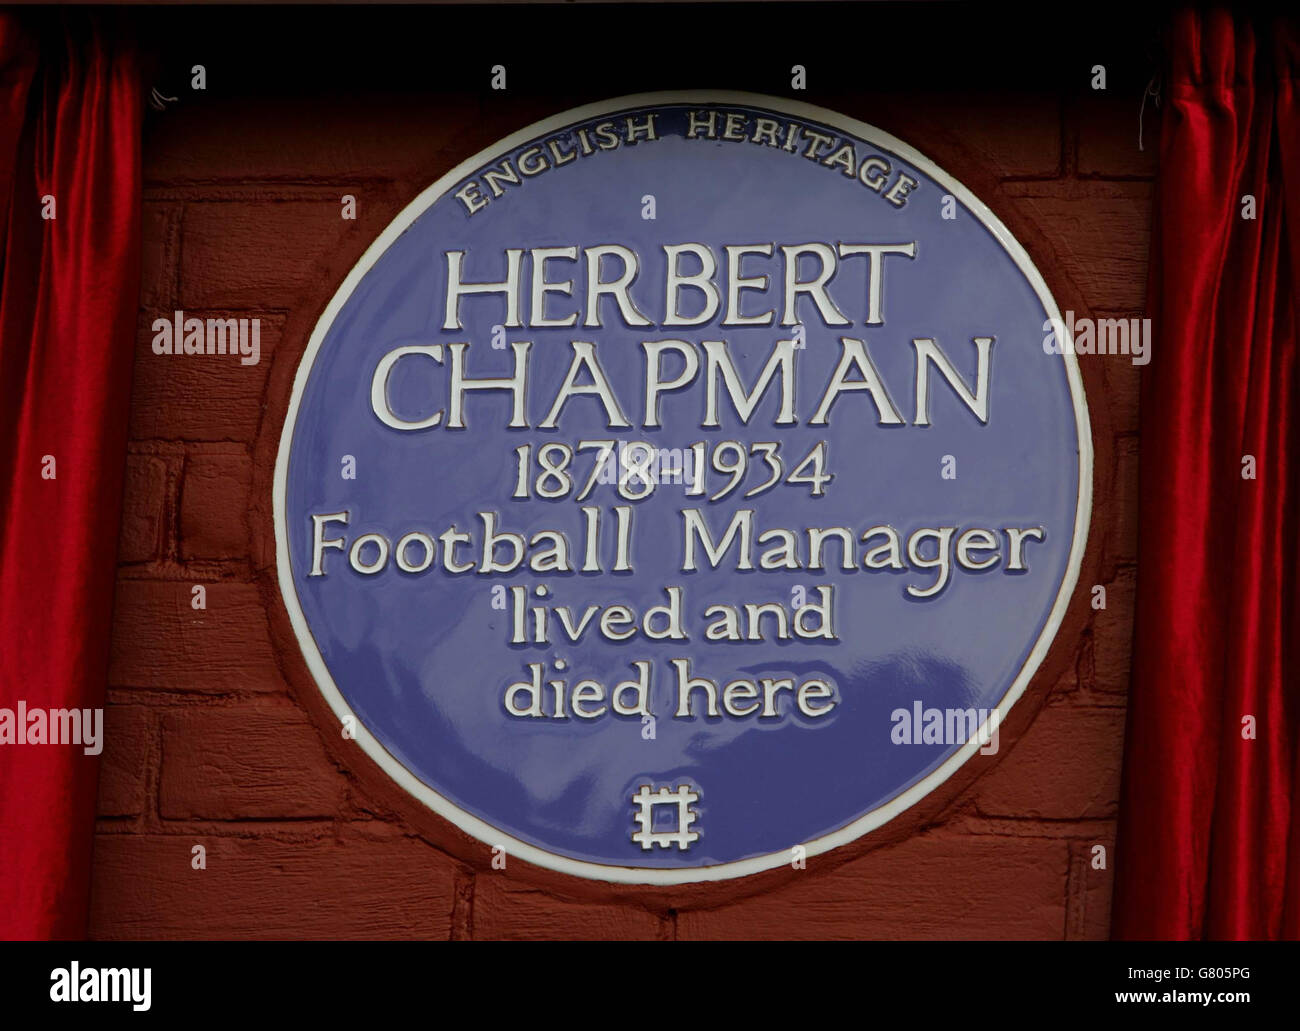 An English Heritage blue plaque unveiled to commemorate Herbert Chapman (1878-1934) the legendary Arsenal Football Club manager who lived in the house for 8 years until his death. Stock Photo